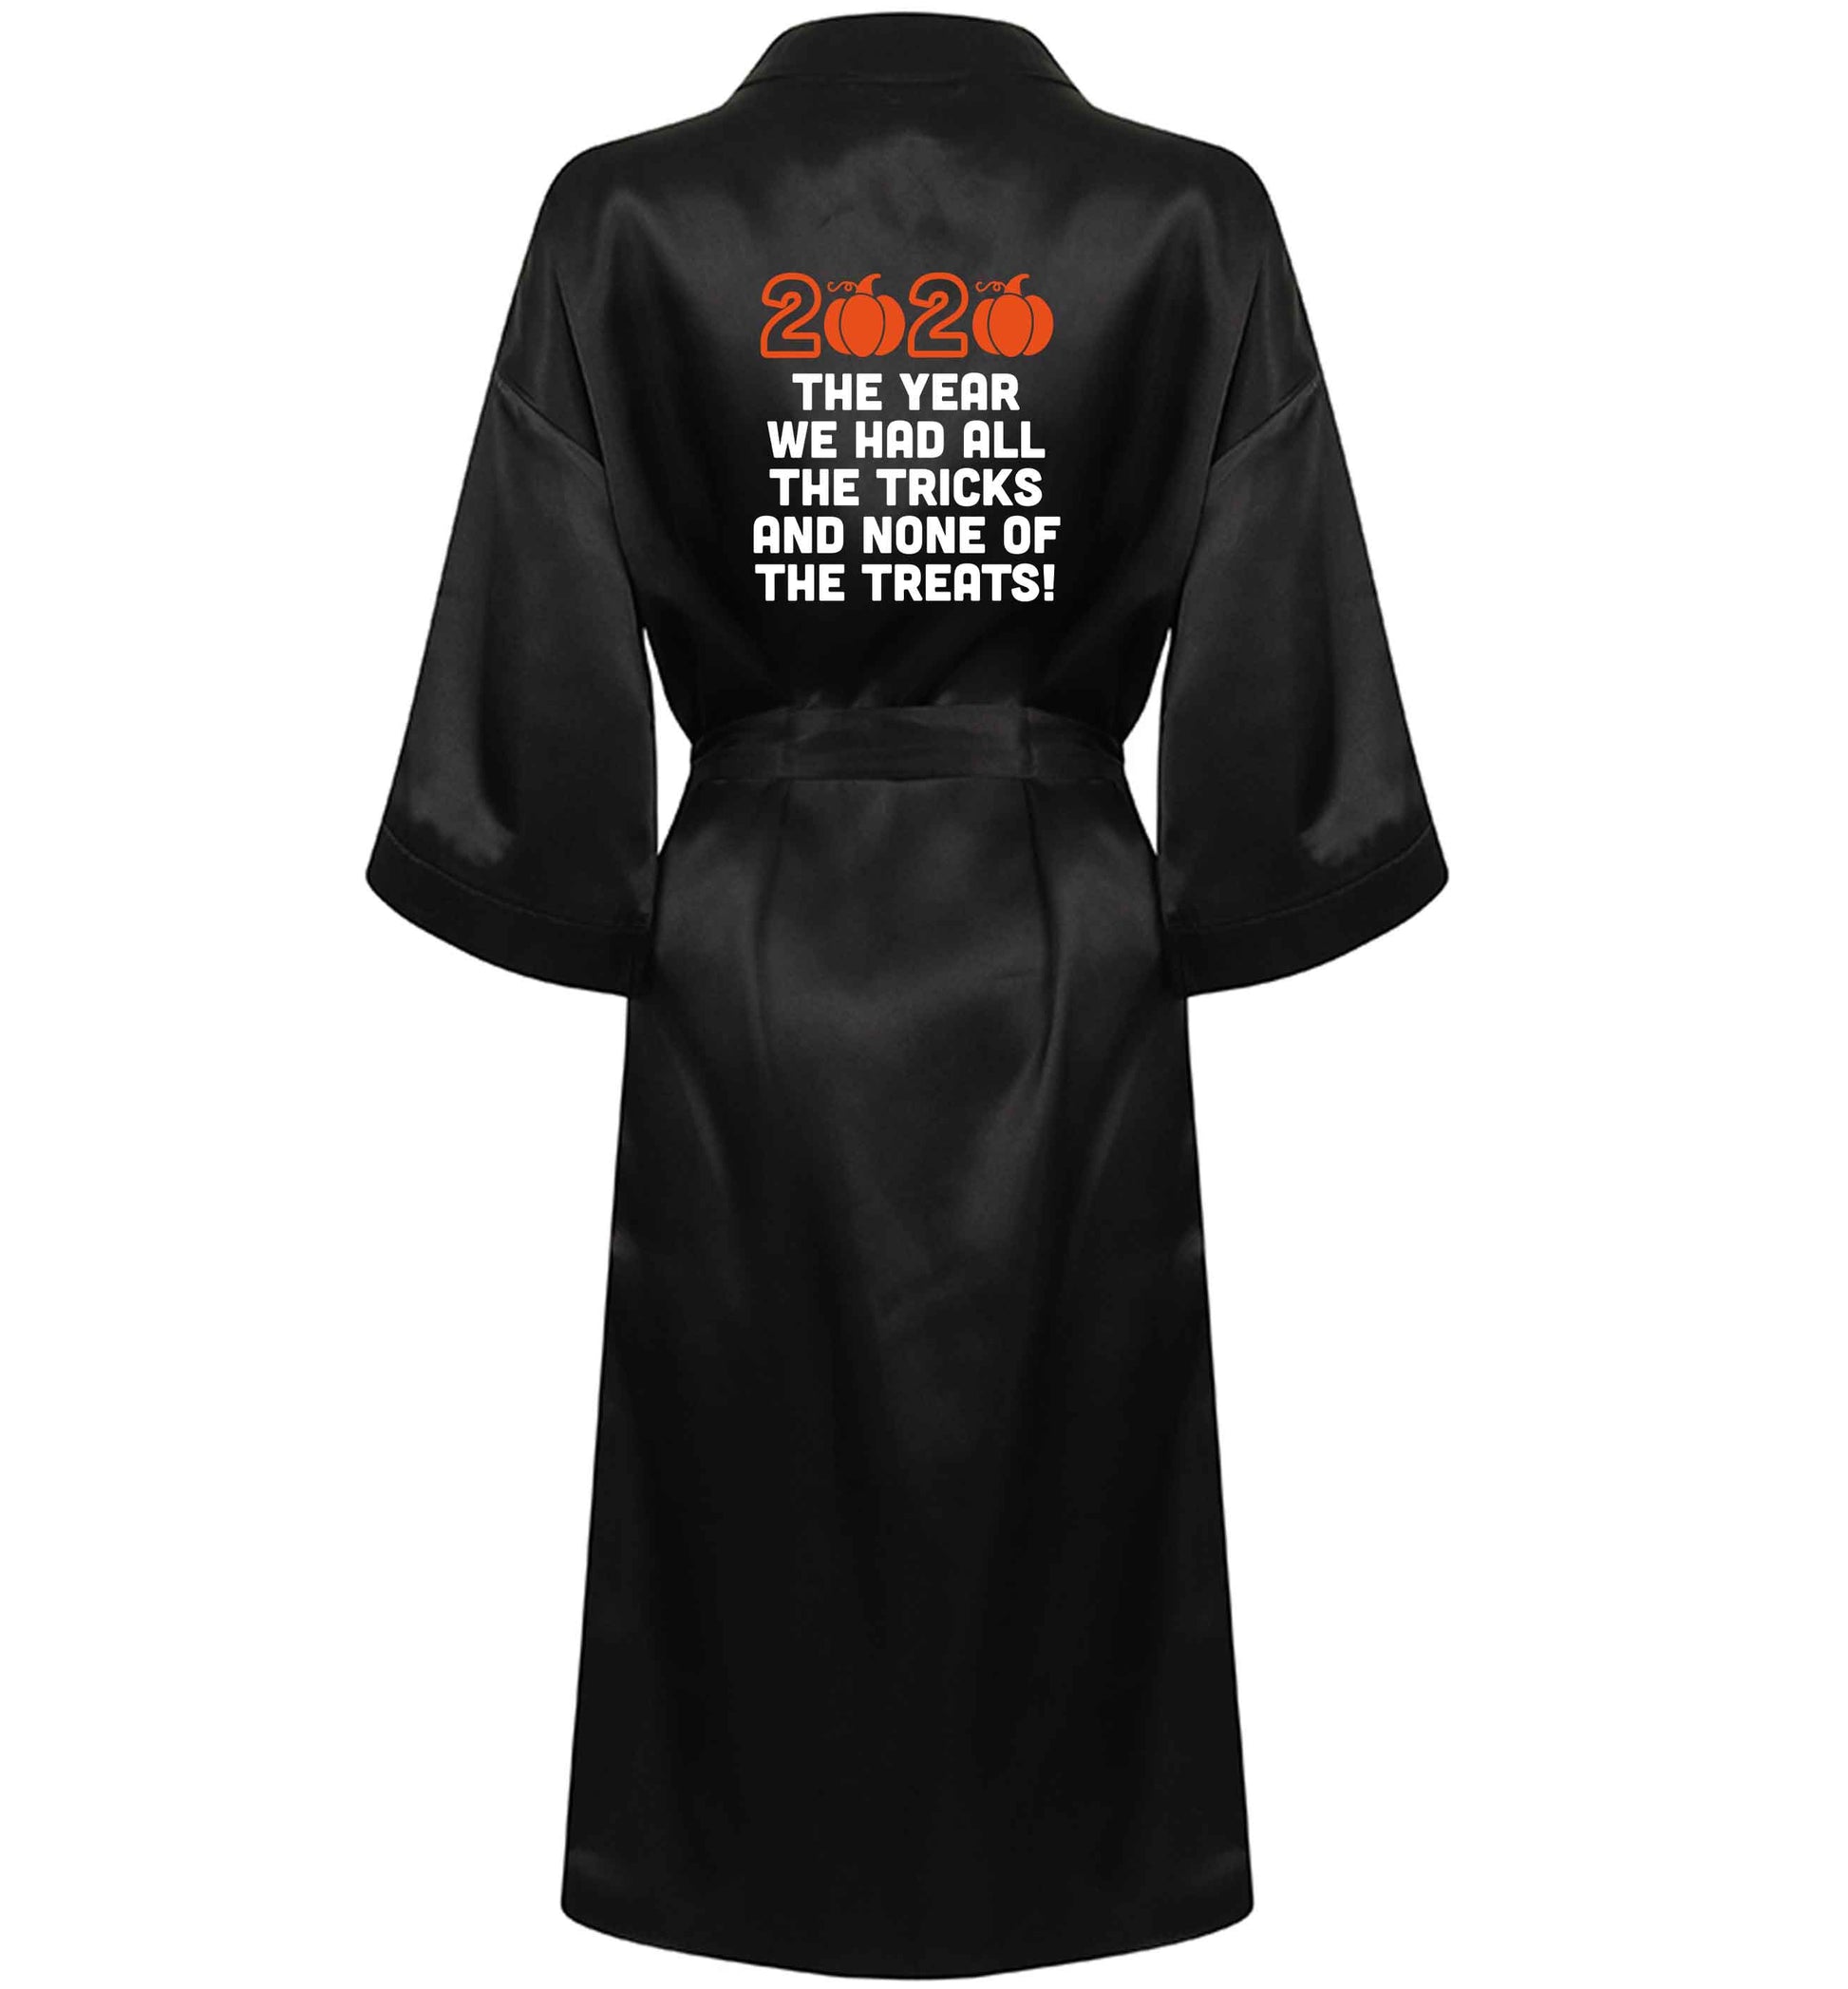 2020 The year we had all of the tricks and none of the treats XL/XXL black ladies dressing gown size 16/18